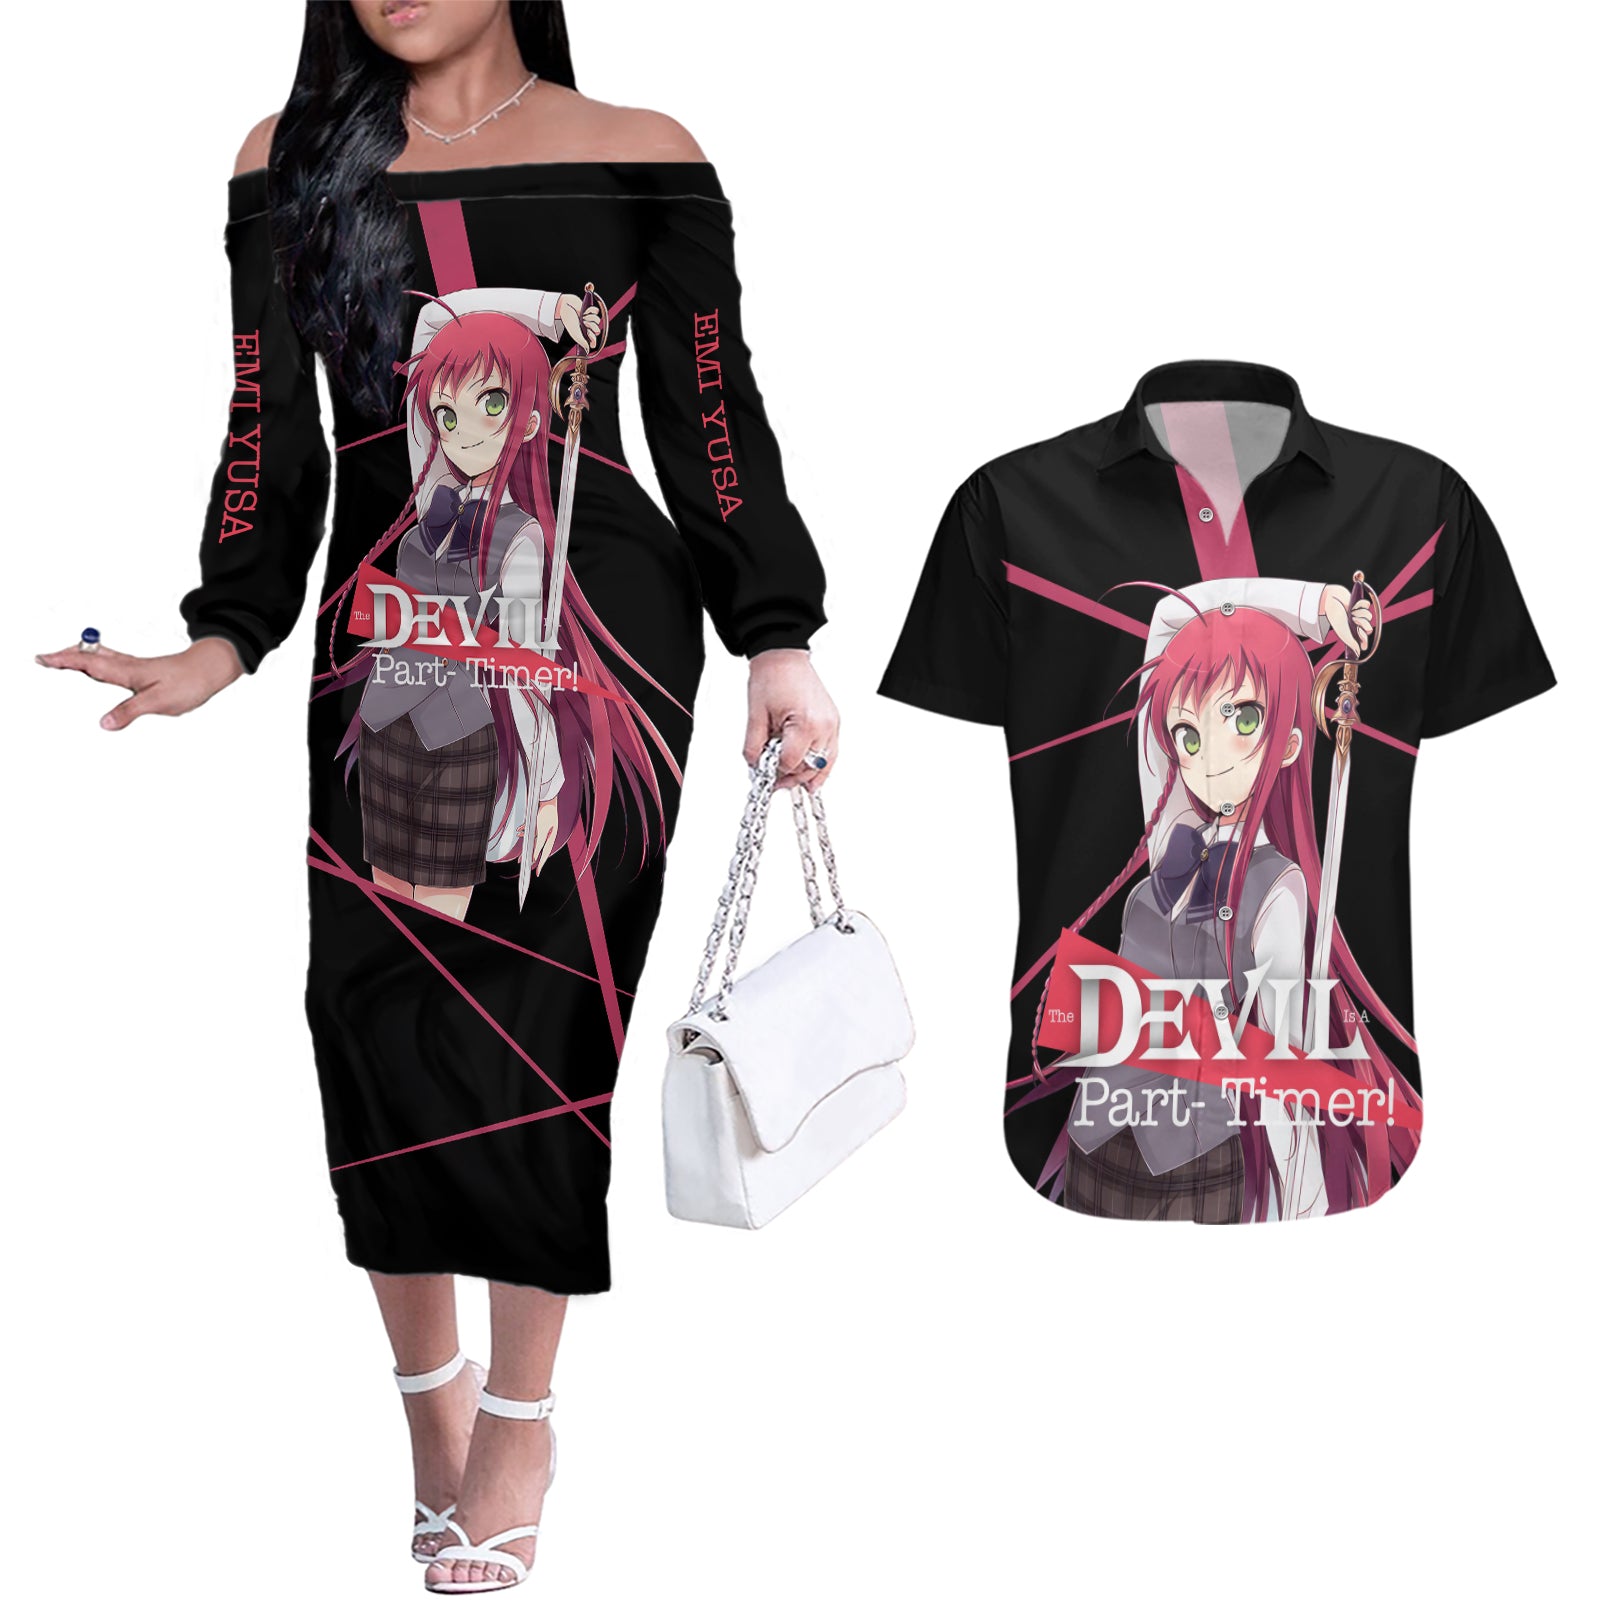 Emi Yusa The Devil Part Timer Couples Matching Off The Shoulder Long Sleeve Dress and Hawaiian Shirt Anime Style